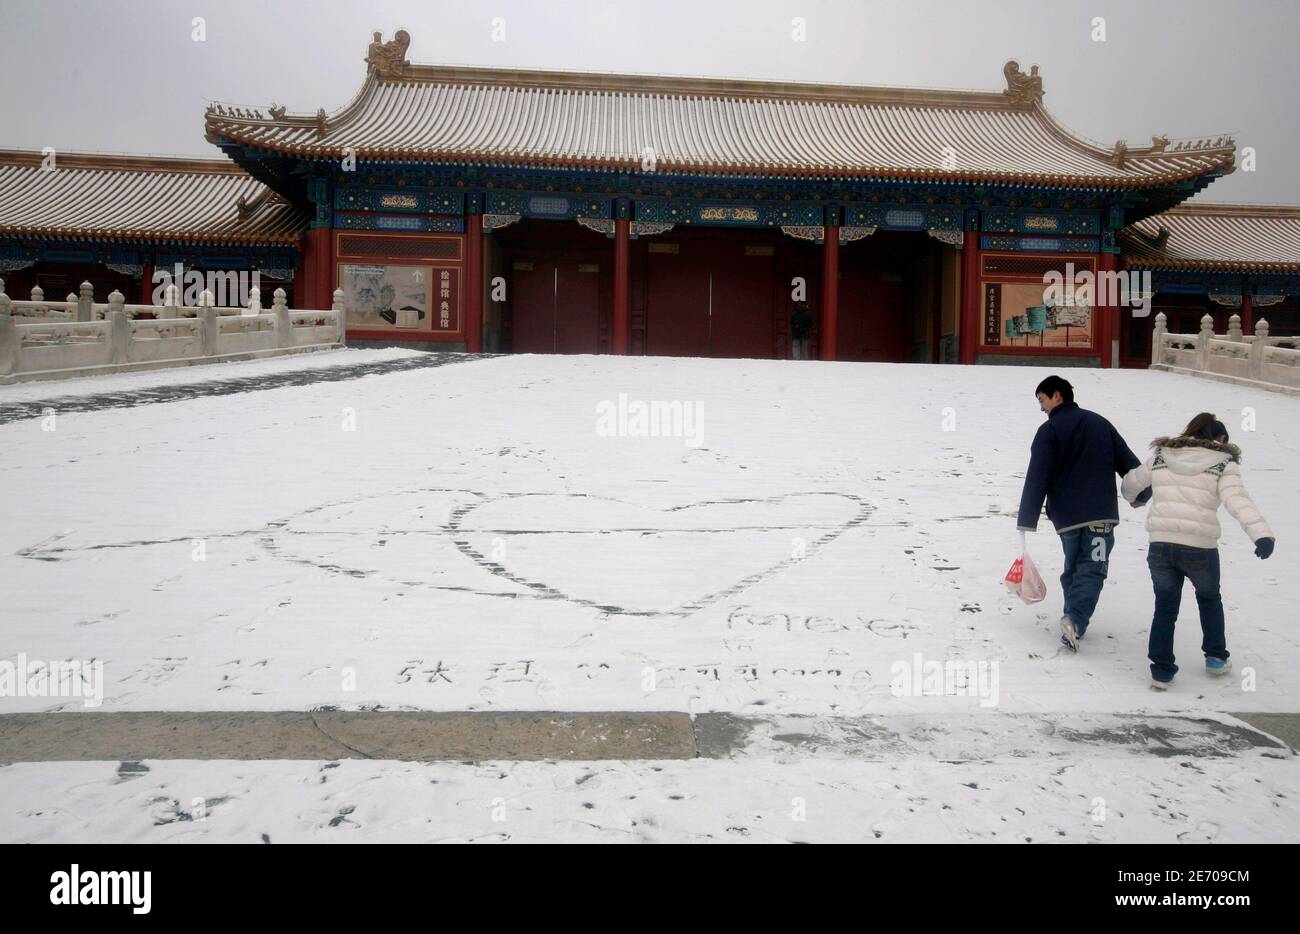 A couple walk away after drawing hearts in the snow inside the Forbidden City, after a snowfall in Beijing February 18, 2009. China took credit on Tuesday for the first snowfall of the winter in Beijing, saying it fired sticks of chemicals into the sky to seed clouds in a bid to end a persistent drought. REUTERS/Jason Lee (CHINA) Stock Photo